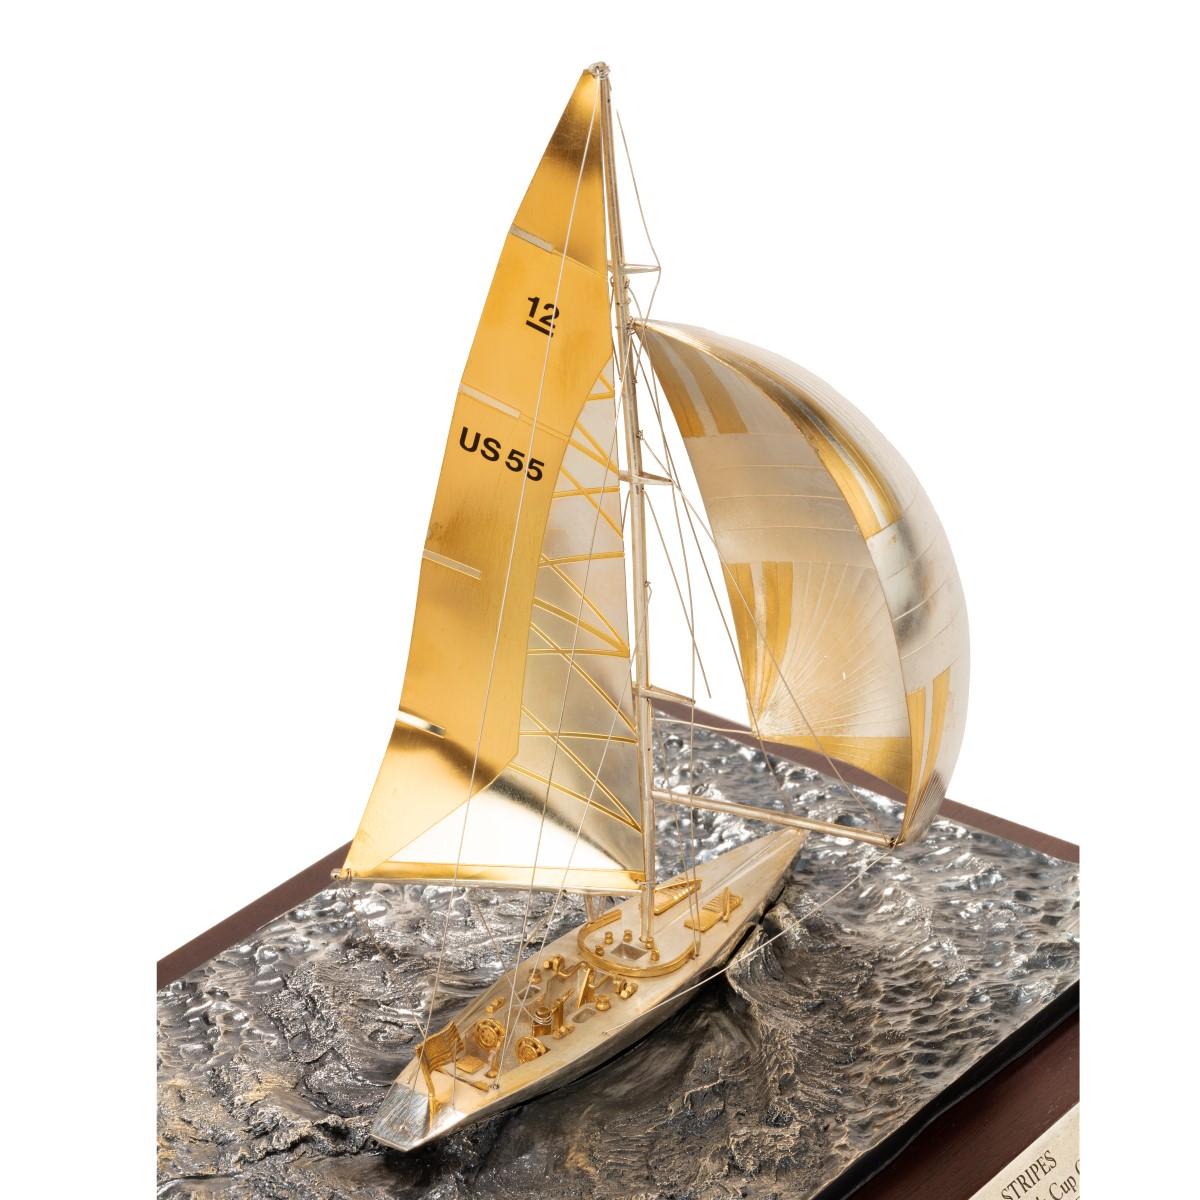 Cased Silver and Gilt Model of America’s Cup Yacht Stars and Stripes, 1987 7